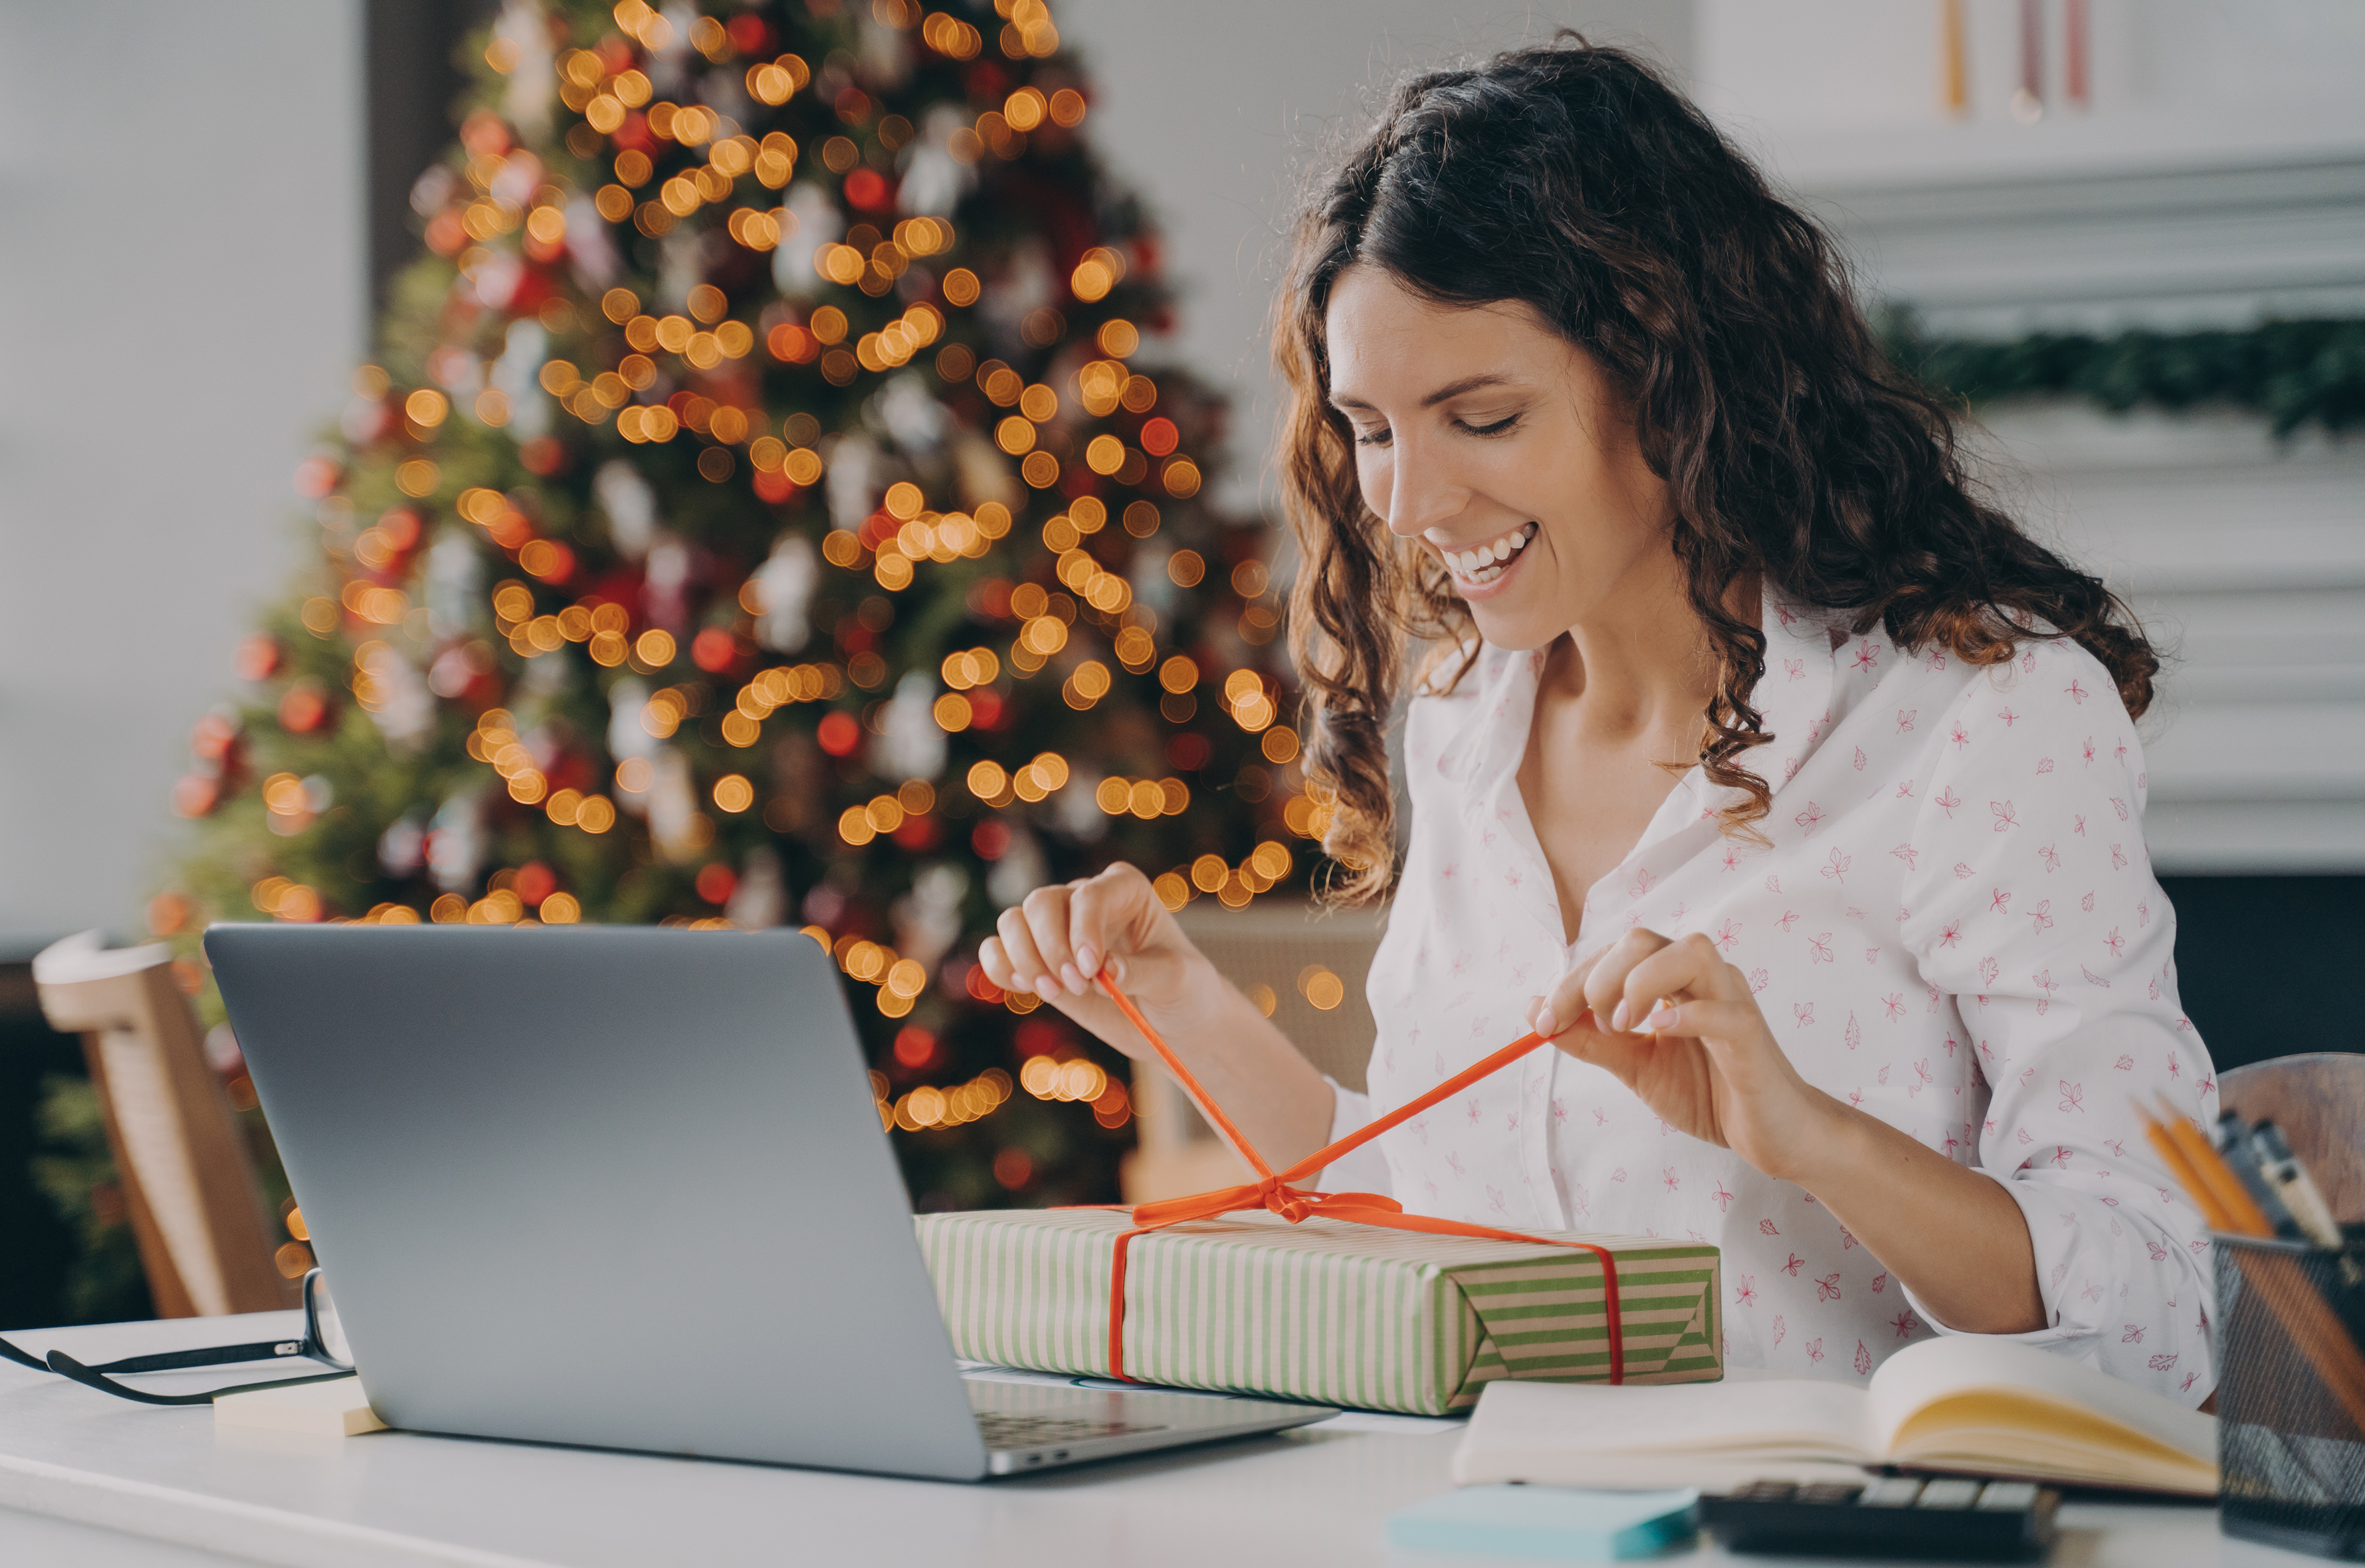 Woman opening a present at her desk at Christmas time